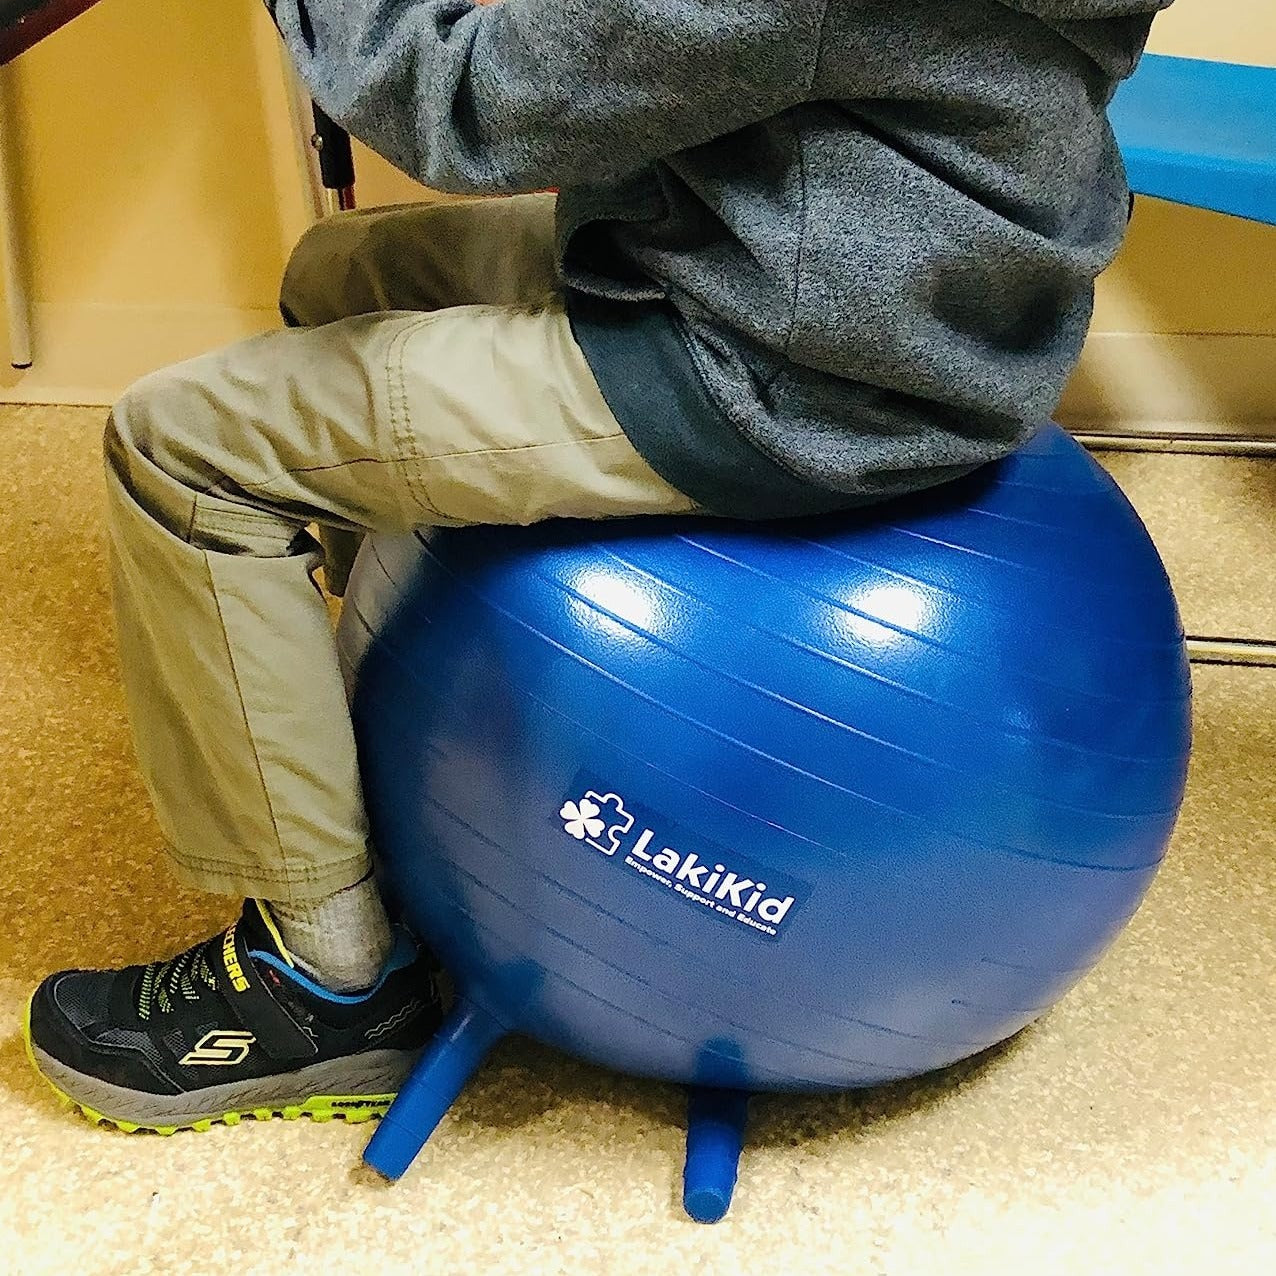 Balance Ball Chair, Our inflatable ball seats allow students to move and balance—reducing restlessness and improving focus while they learn! The Balance Ball Chair is made with sturdy, easy-clean PVC that’s lightweight enough for kids to move around the class, the seats each include legs to keep them in place right where you want them Balls are commonly used for: To improve dynamic balance by sitting or lying on top of the ball Activities to facilitate movement and general gross motor coordination Exercises